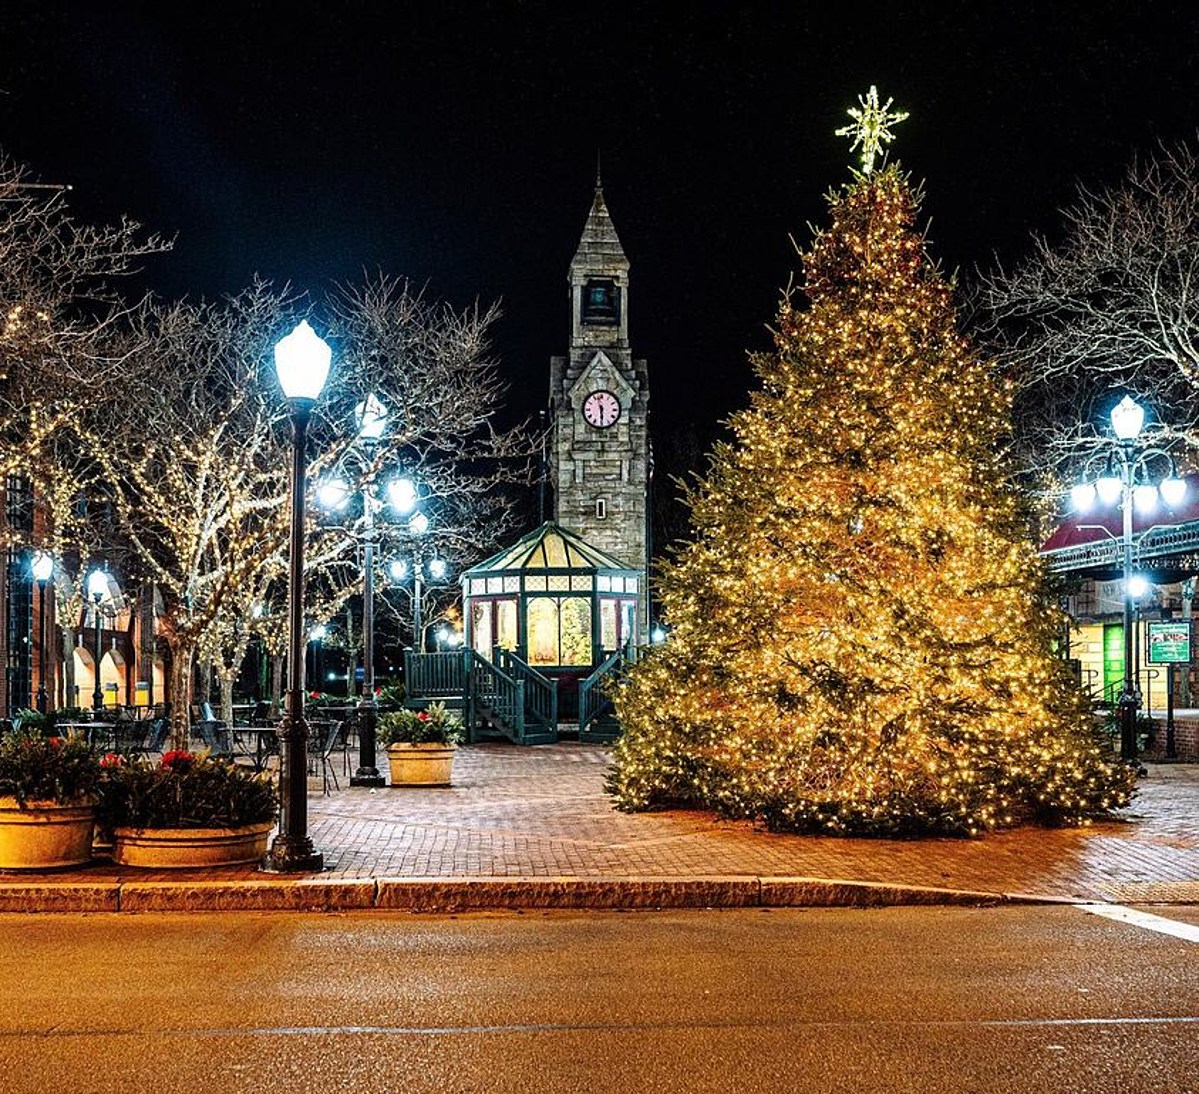 Corning New York Among 55 Best Christmas Towns in America